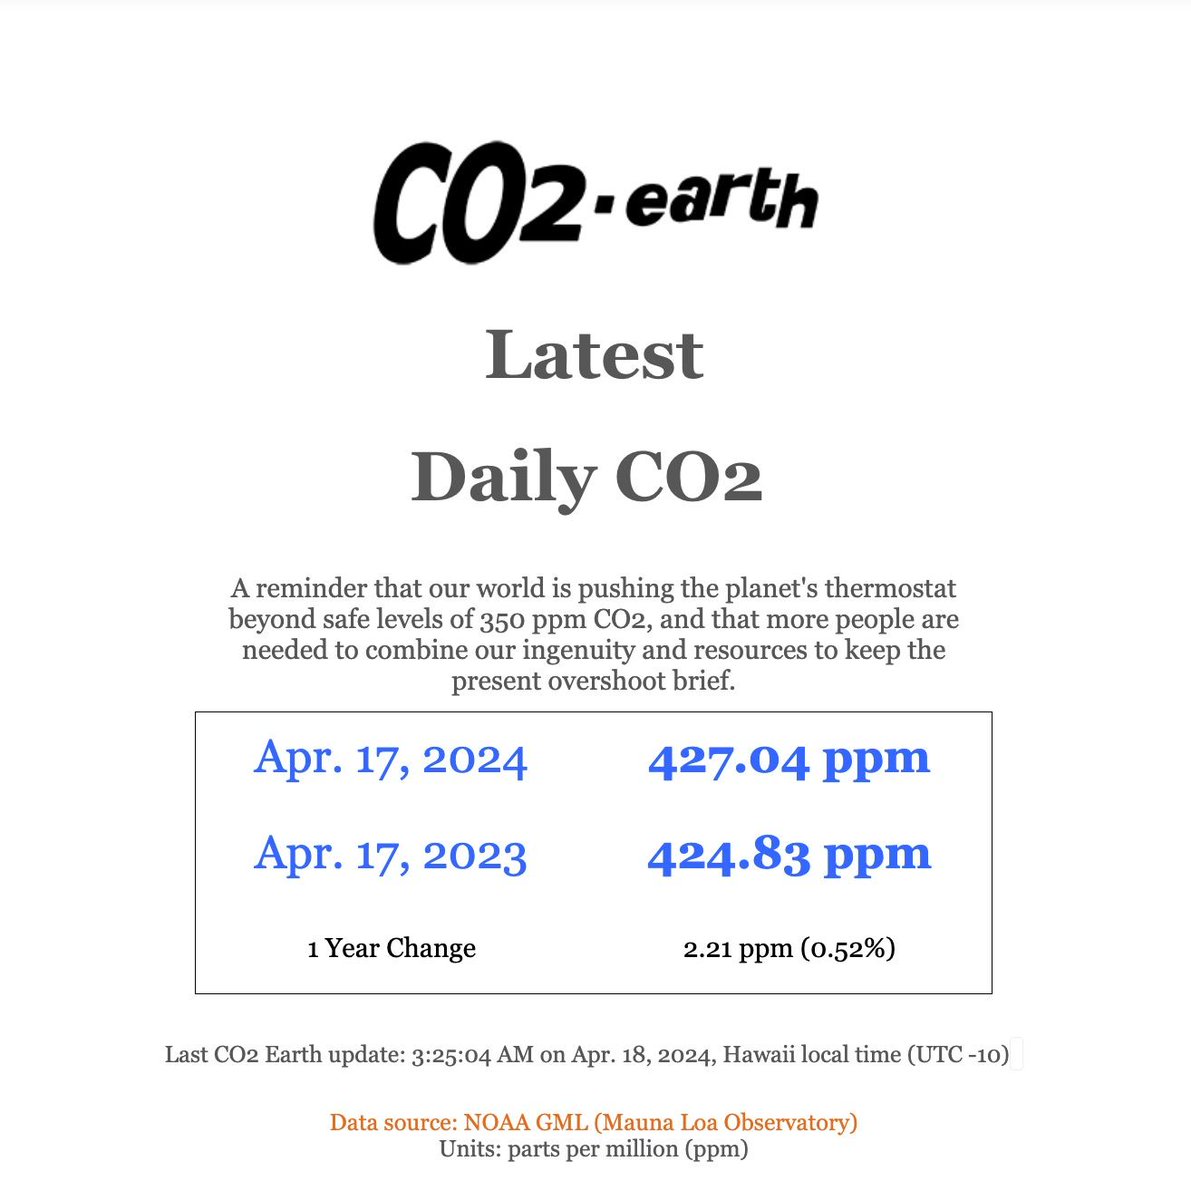 🌎📈 427.04 ppm #CO2 in the atmosphere on Apr. 17 2024 📈 Up 2.21 from 424.83 ppm one year ago 📈🌎 @NOAA Mauna Loa data: gml.noaa.gov/ccgg/trends/mo… 🌎 CO2.Earth Daily: co2.earth/daily-co2 🌎 🙏 Please help keep this 350 overshoot brief 🙏